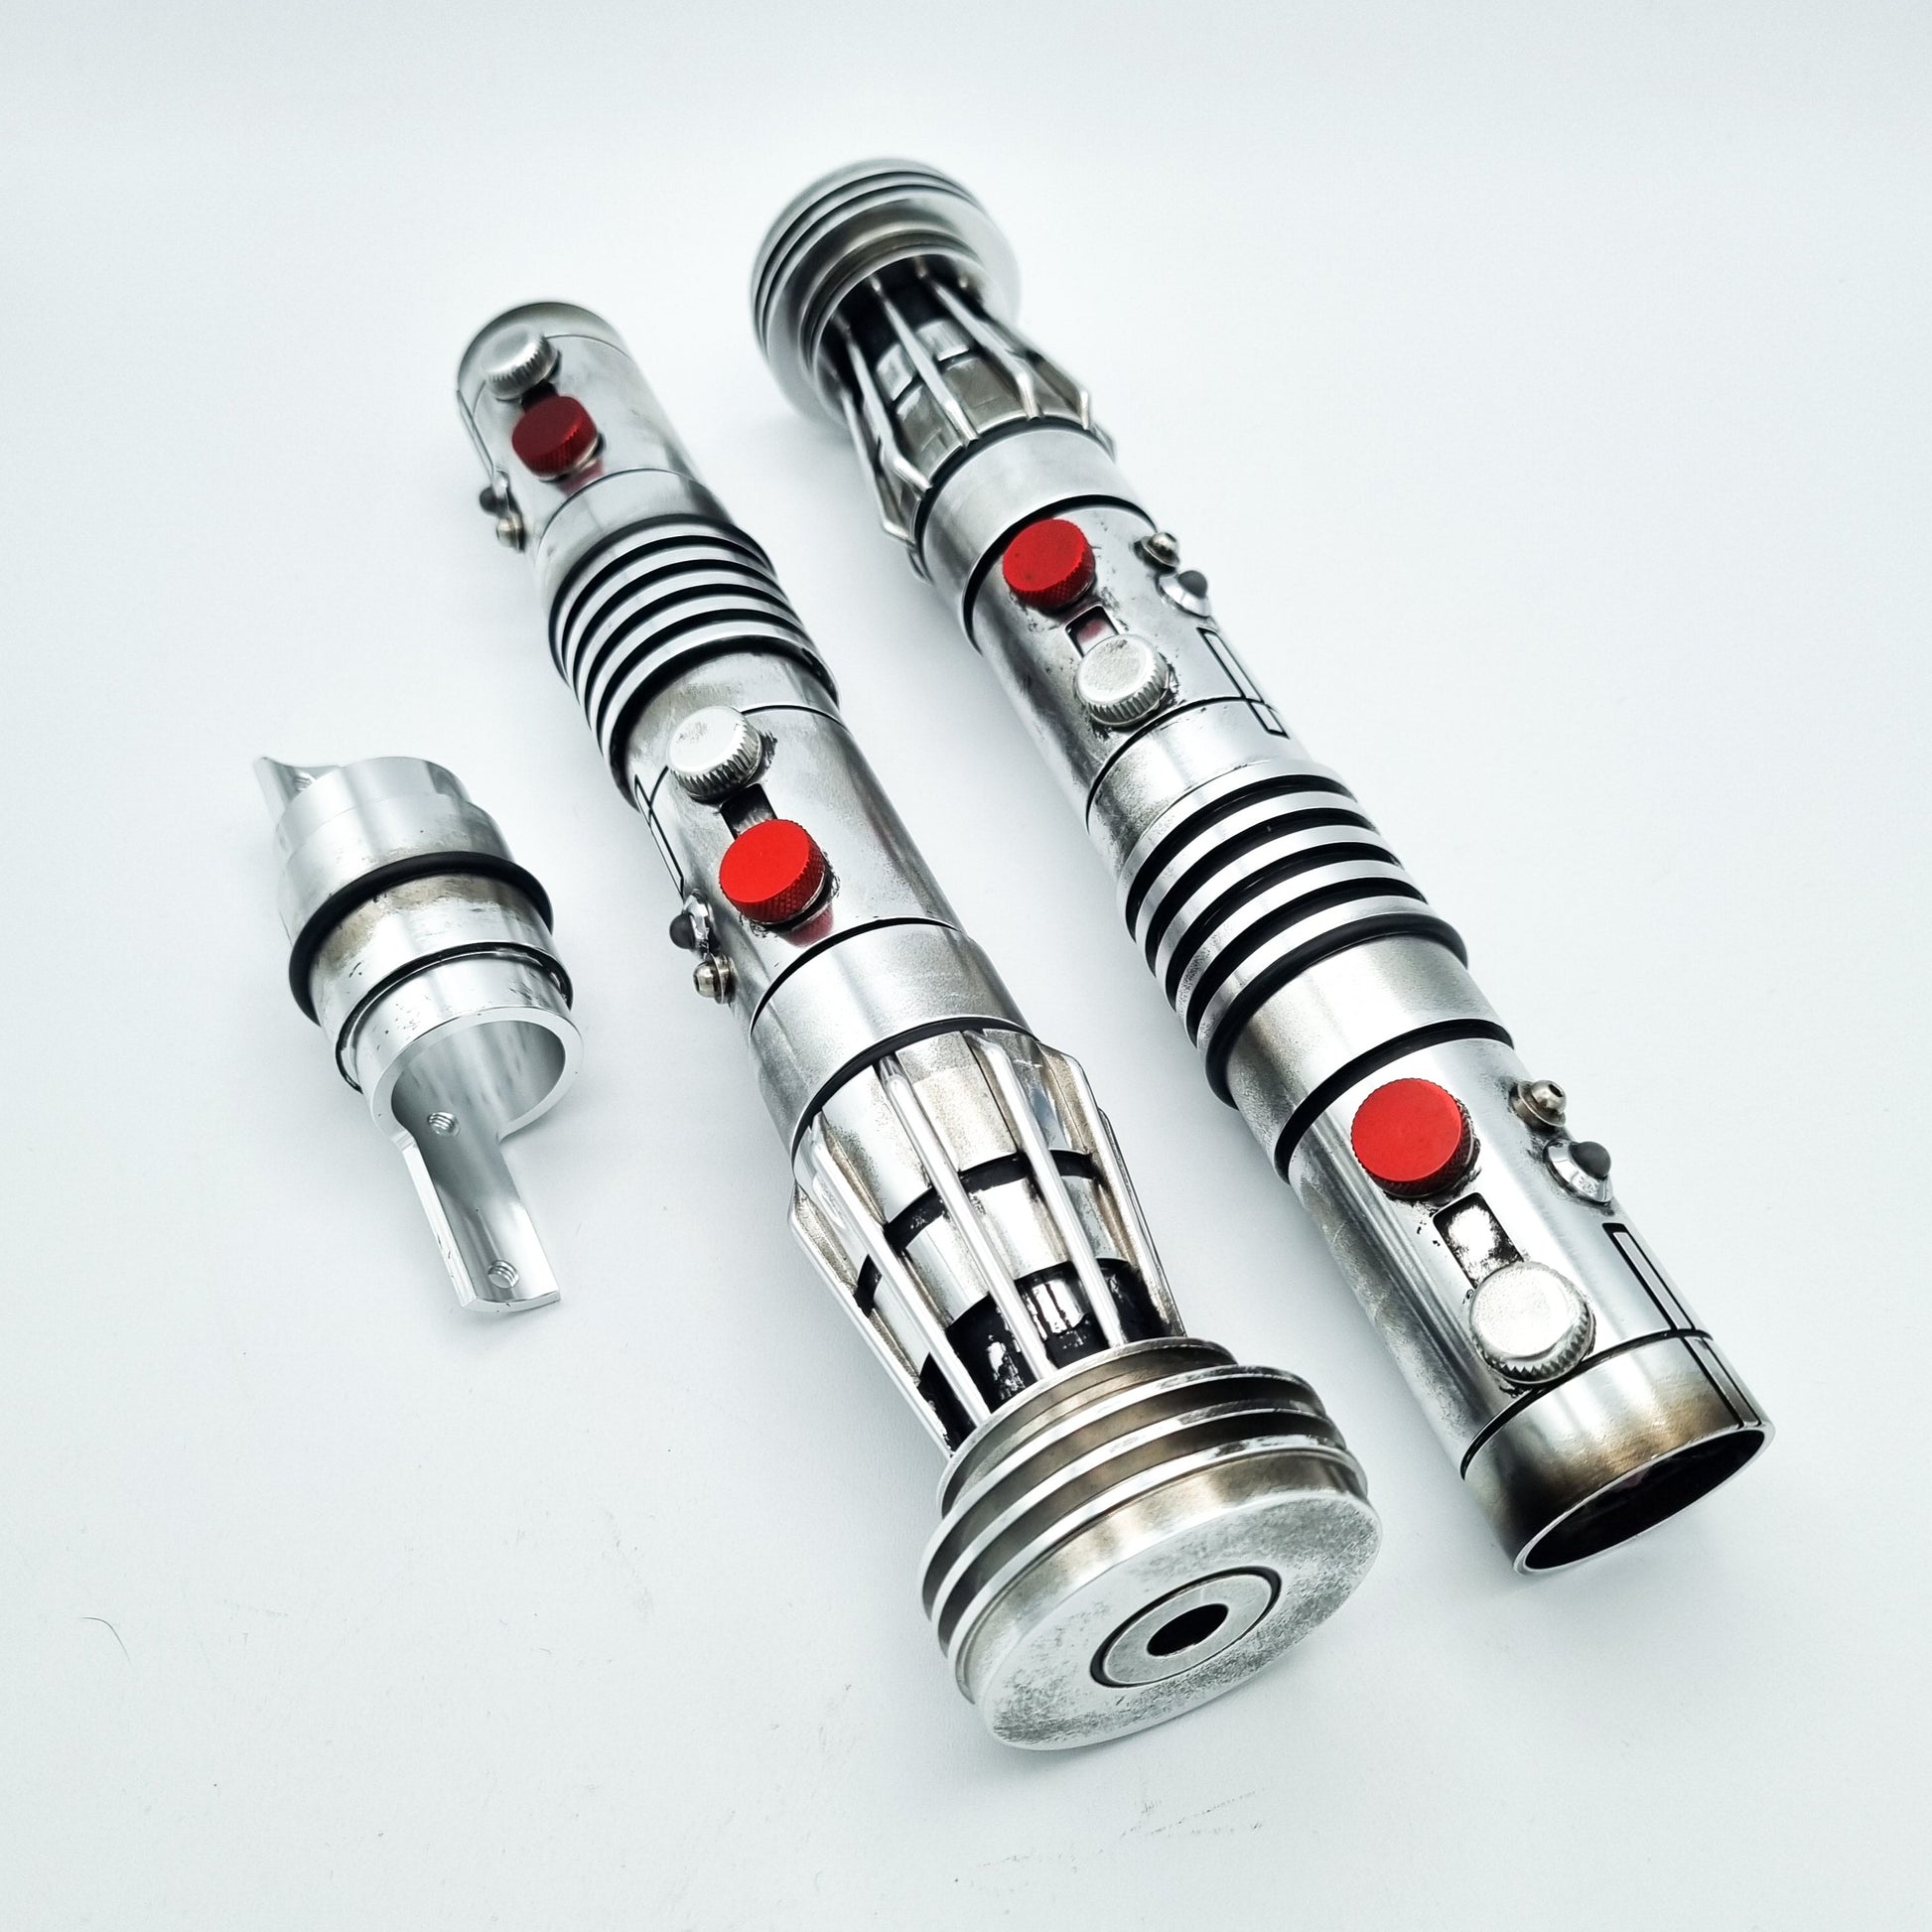 Collectors Edition Lightsaber - Collectors Edition Saber - 89 Sabers Darth Maul Weathered - Padawan Outpost